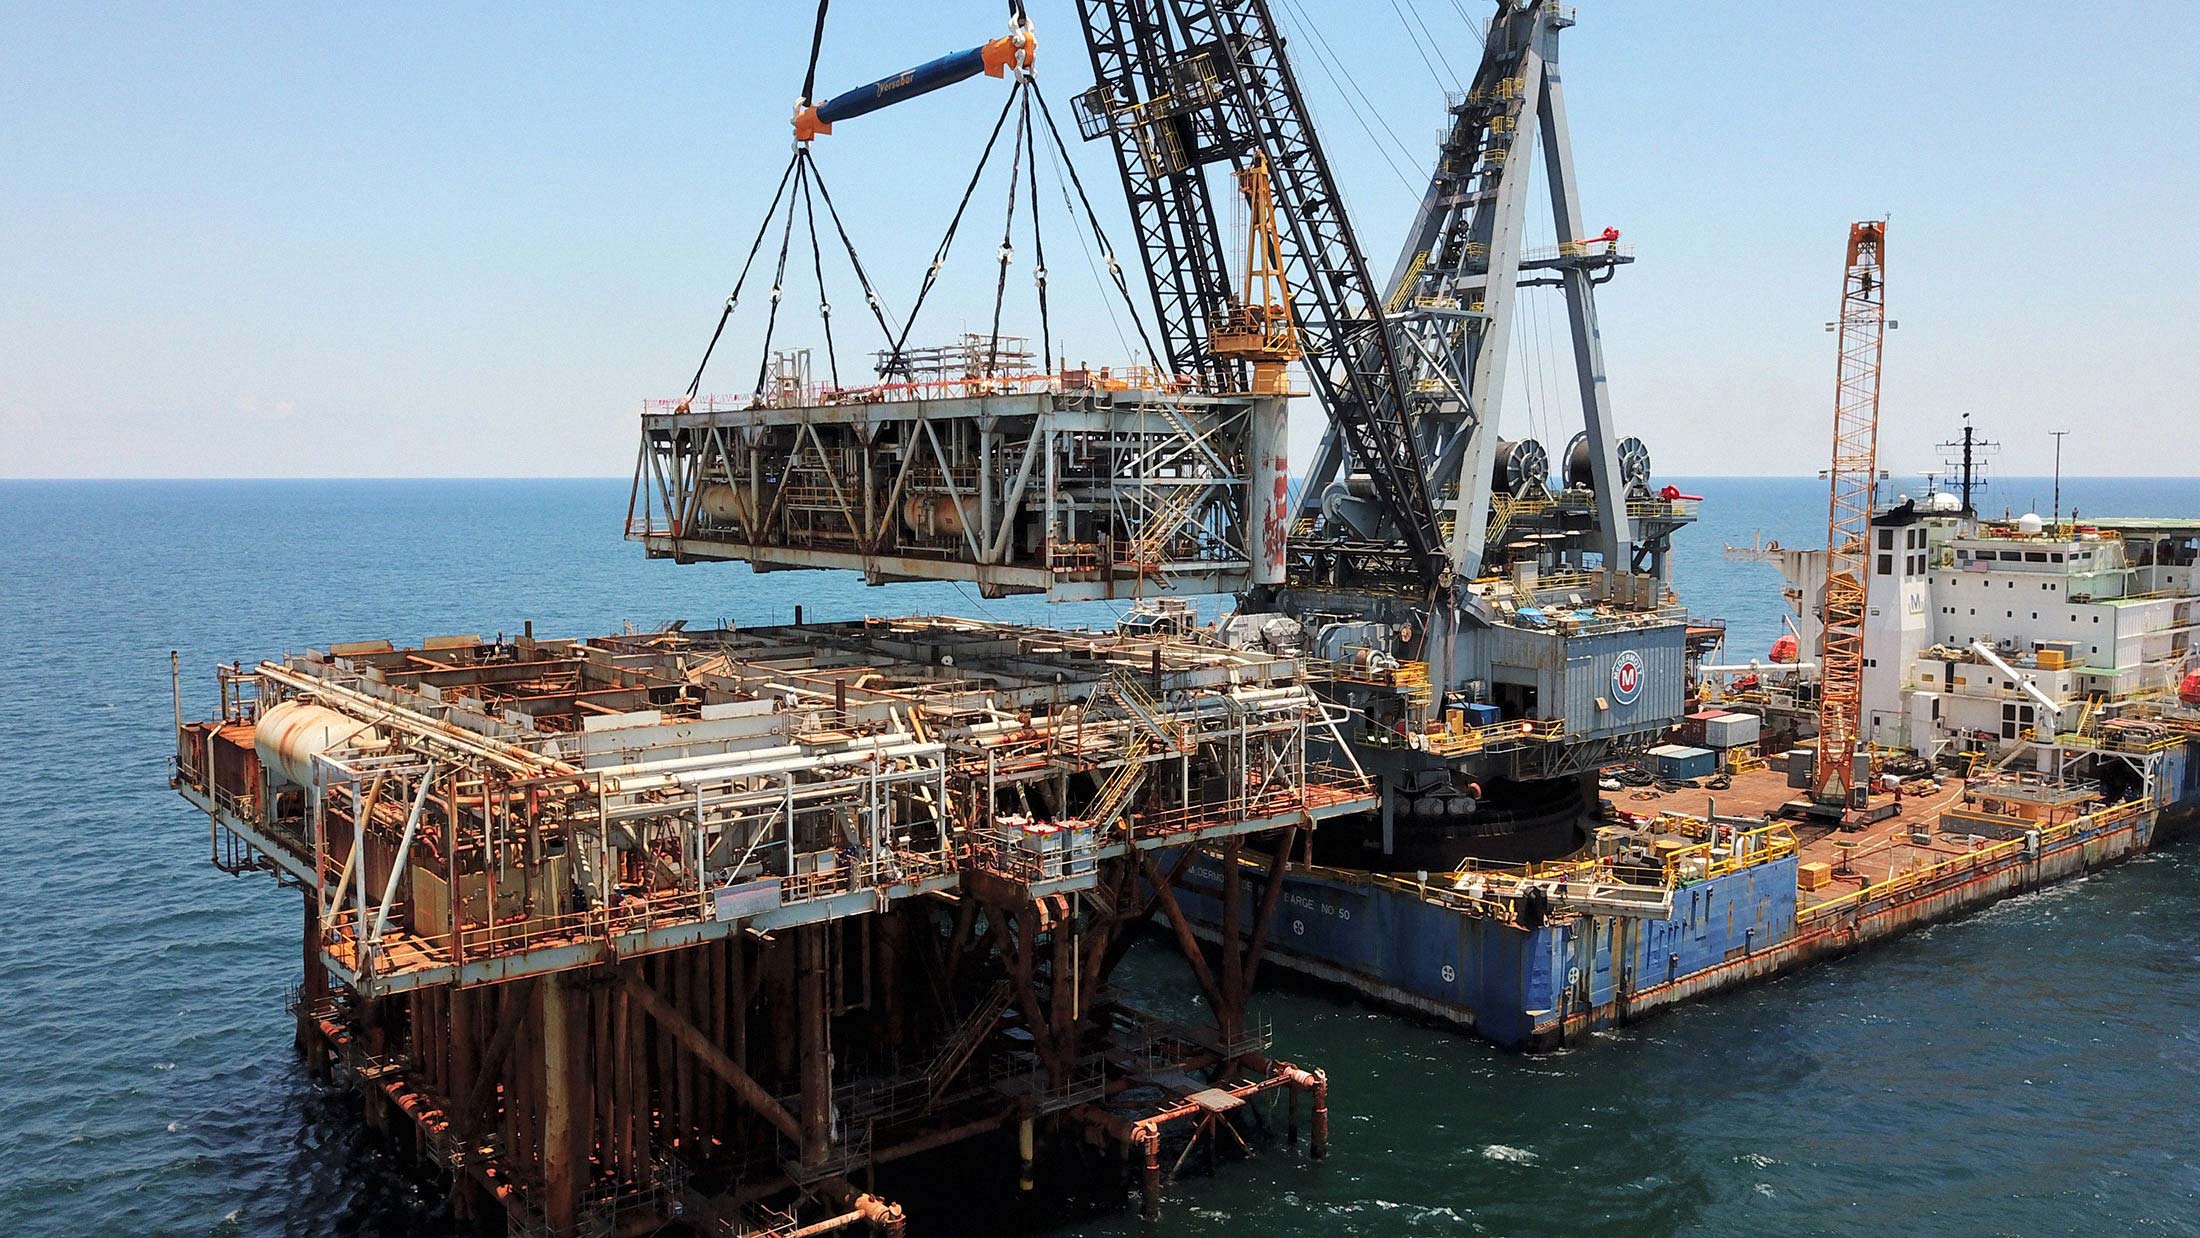 How an ExxonMobil Offshore Oil Rig Became an Artificial Reef